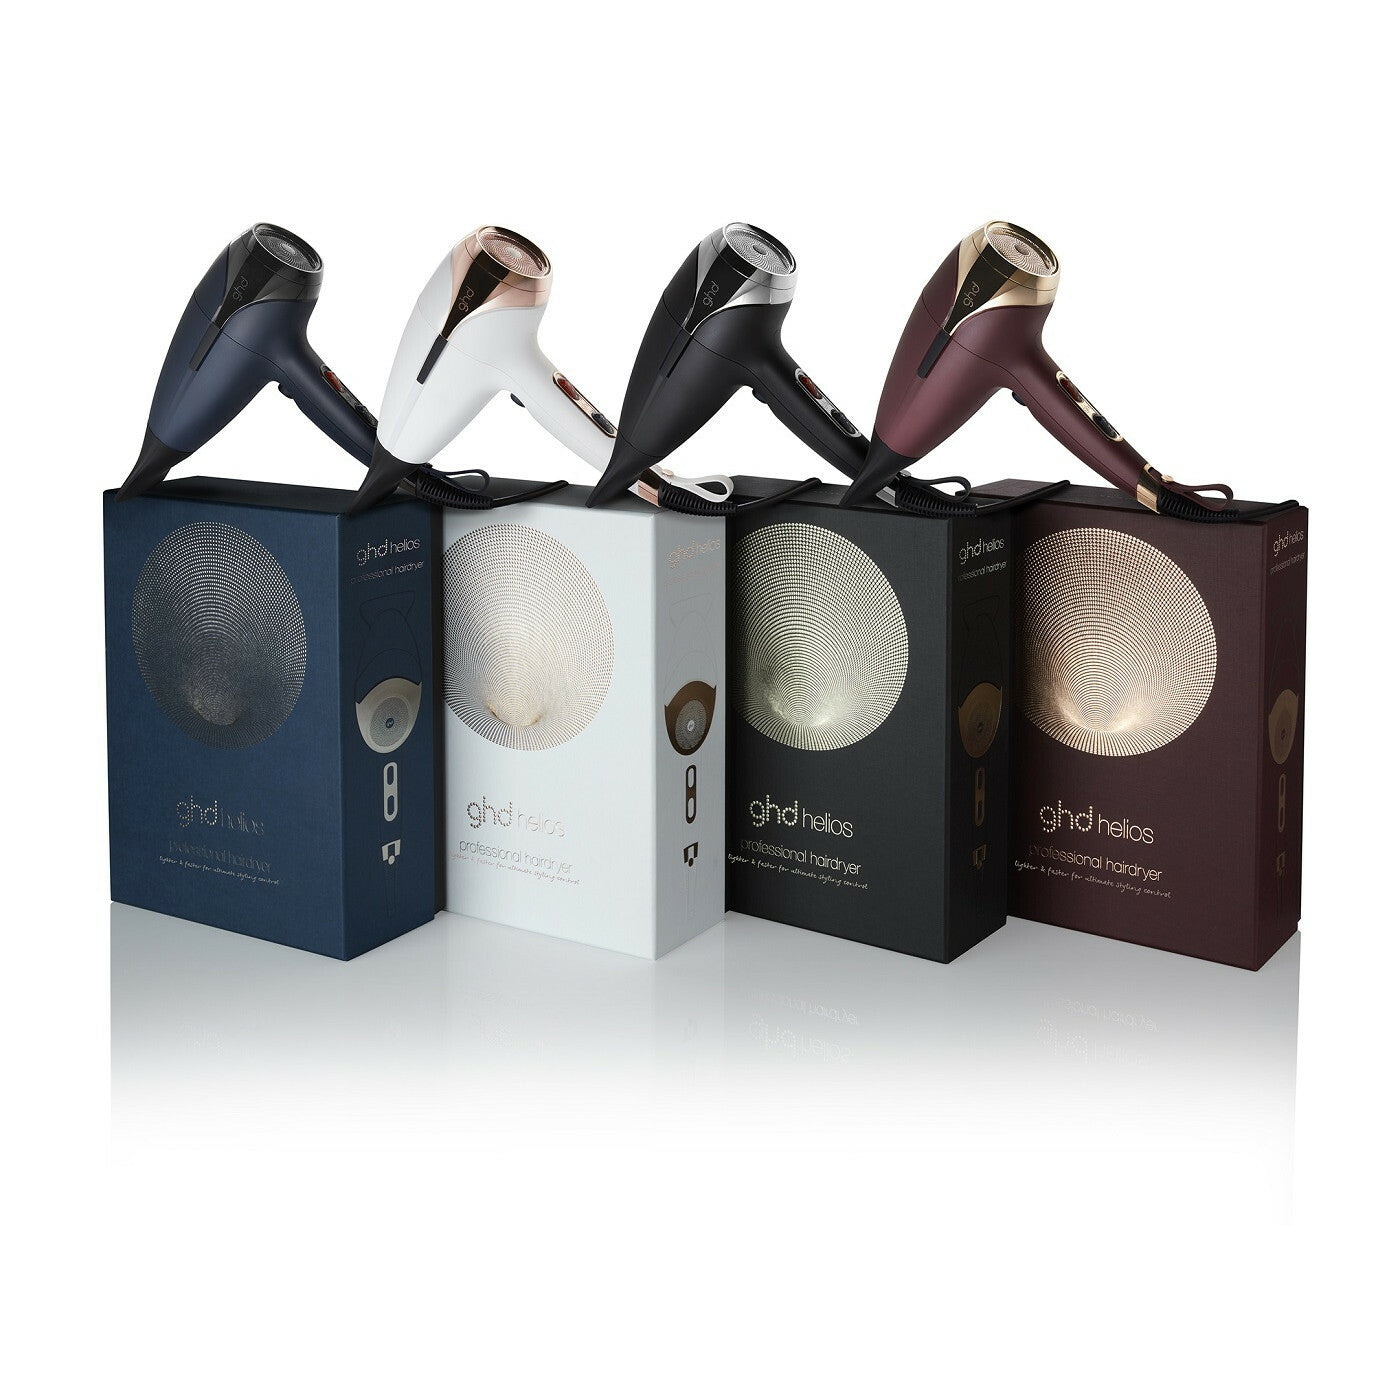 GHD Helios Professional Hair Dryer, all colours